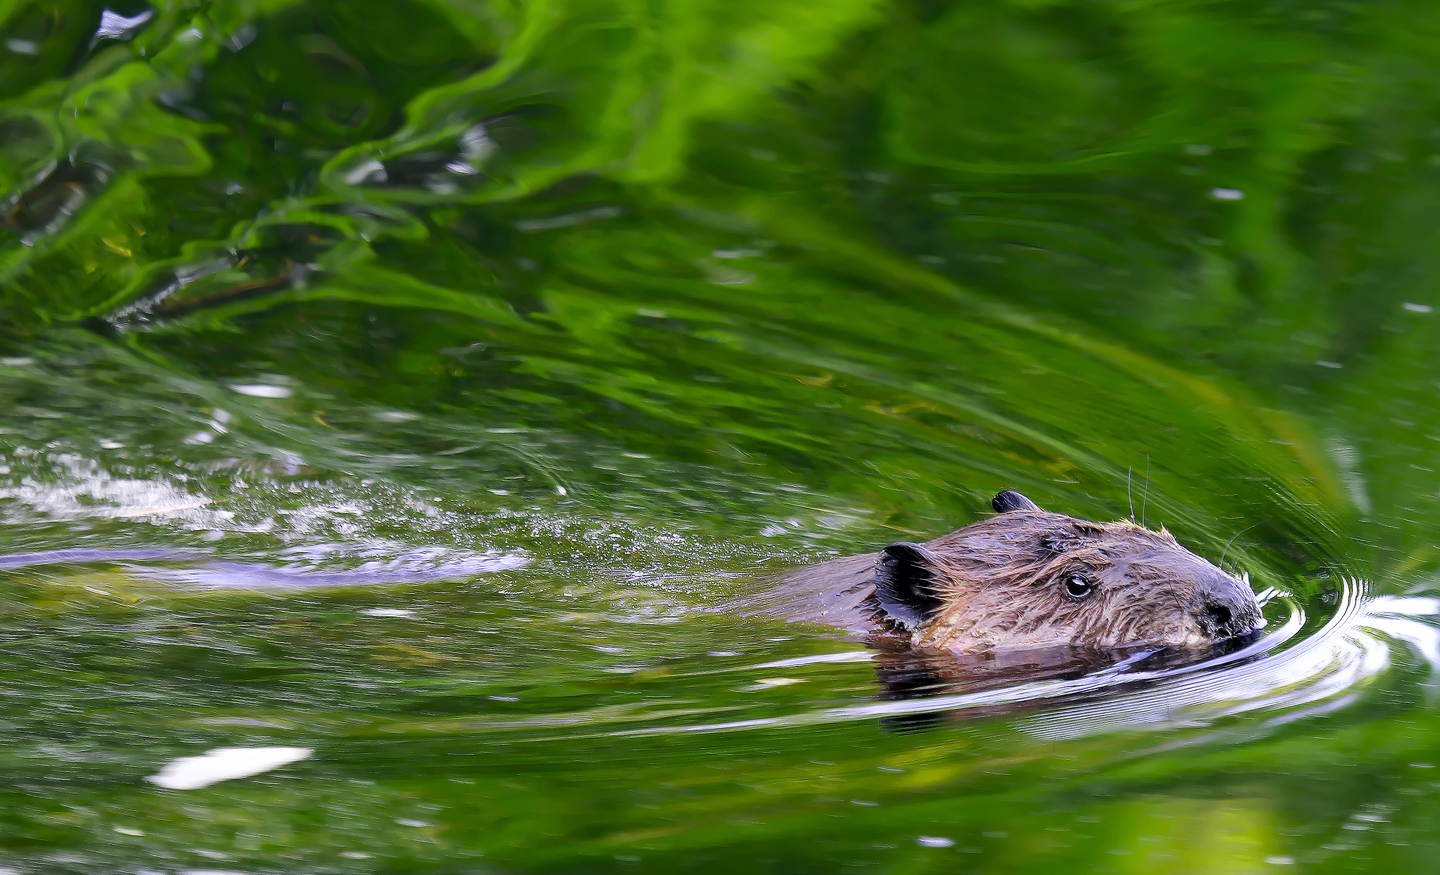 Beavers are back in London